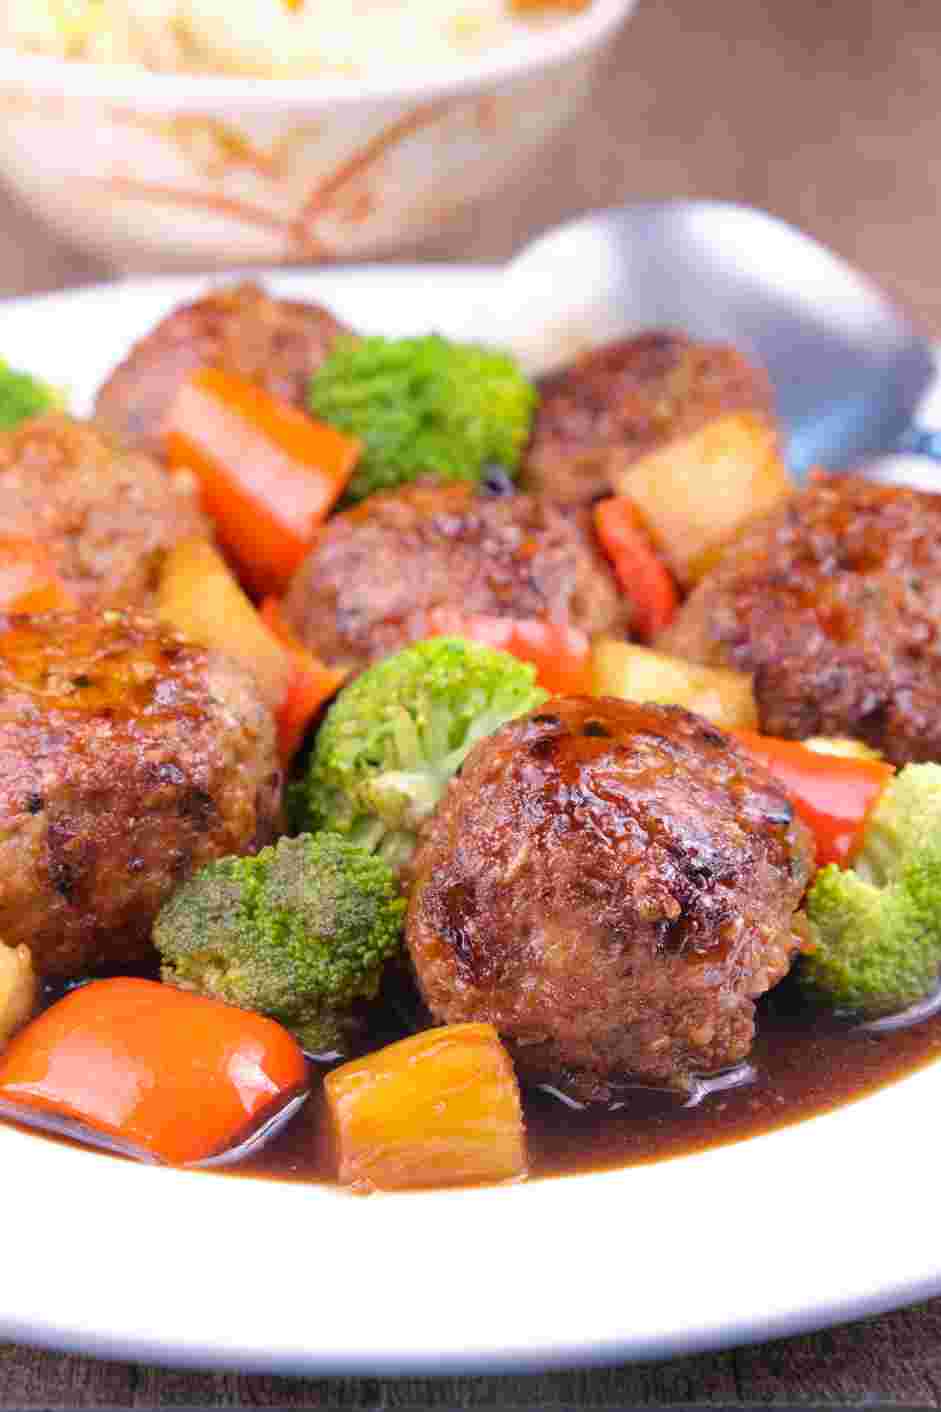 Teriyaki Pineapple Meatballs Recipe: Cover the skillet to allow the broccoli and peppers to steam for about 5 minutes.